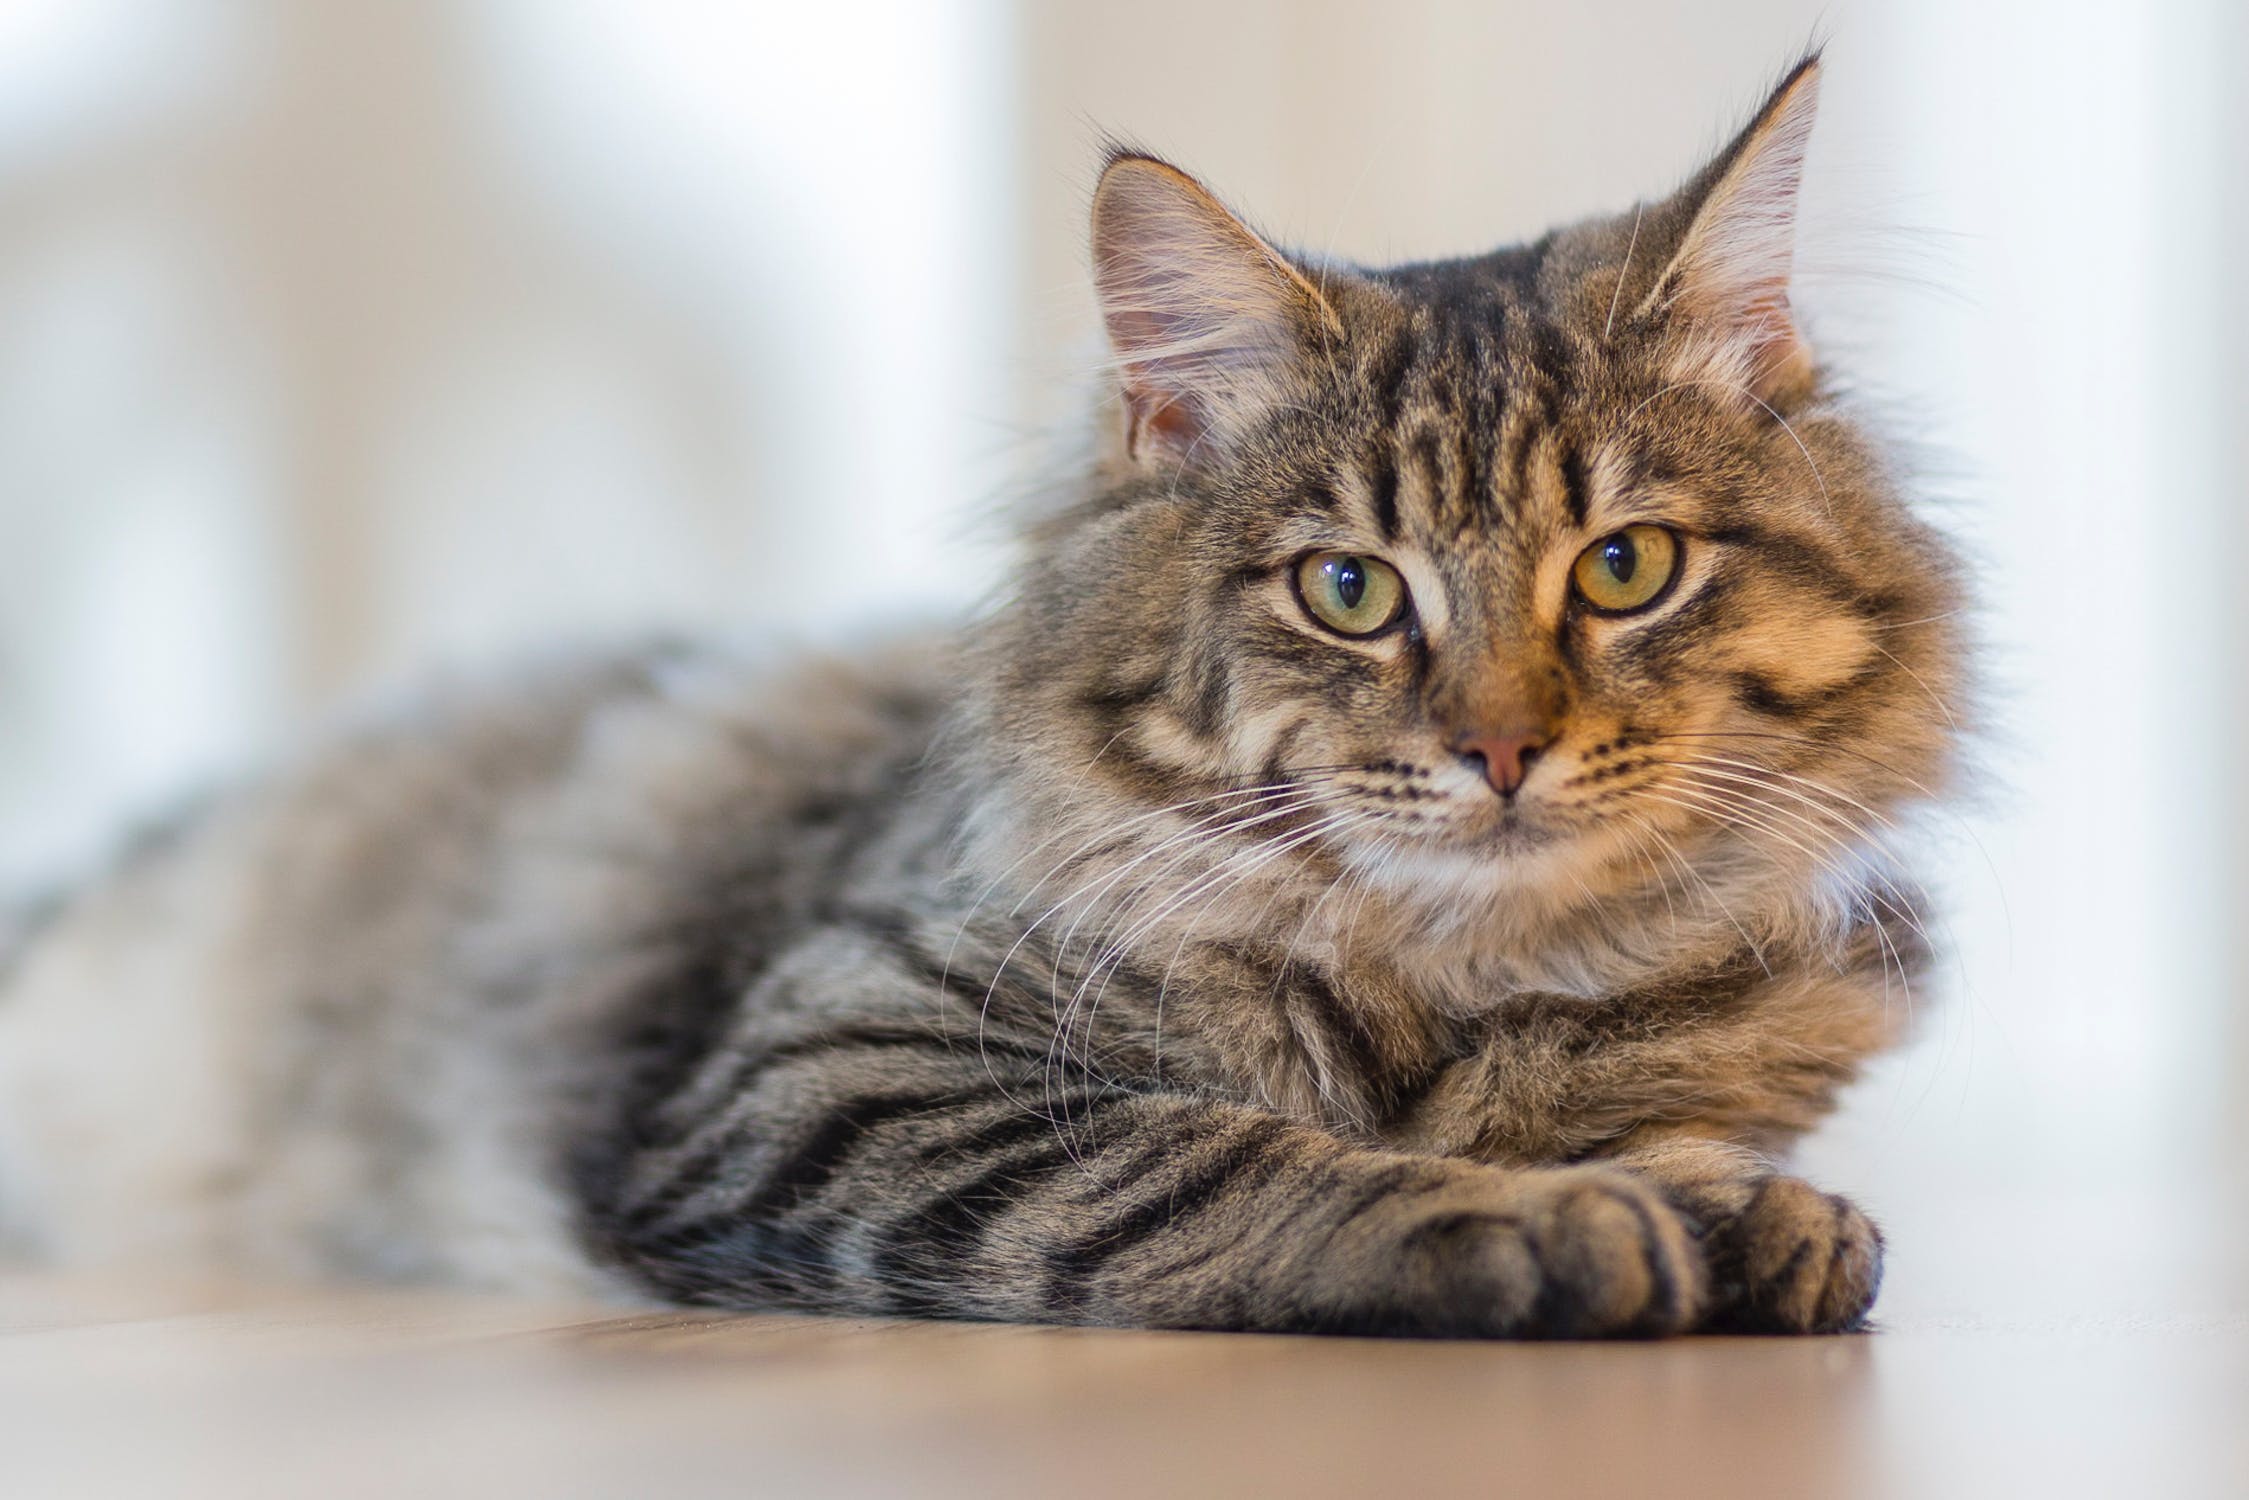 Can Cats Become Service Animals?